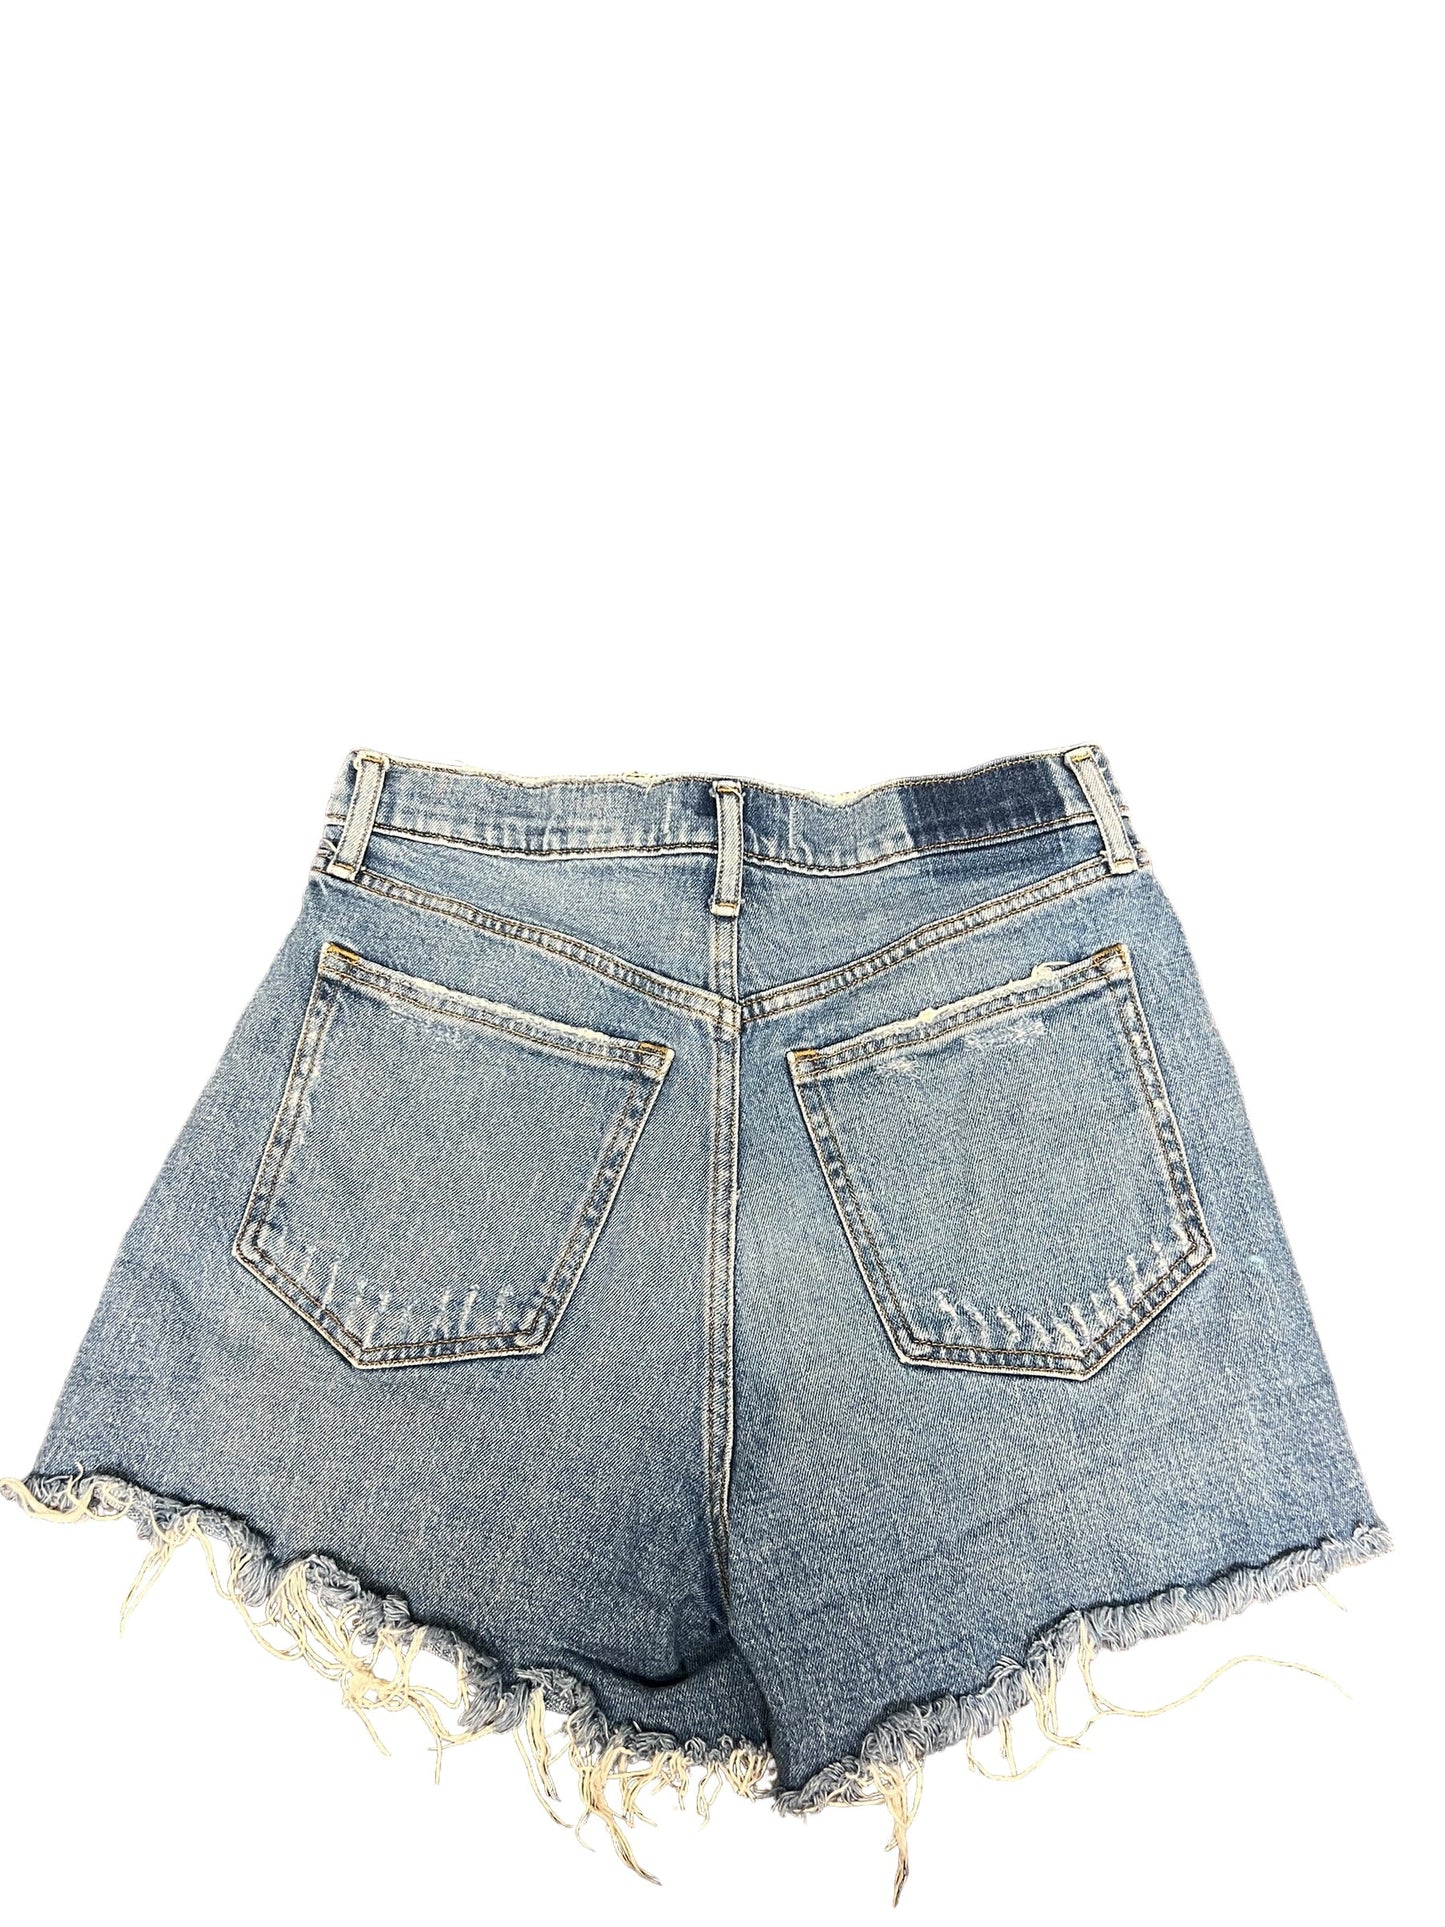 Blue Denim Shorts Abercrombie And Fitch, Size 6